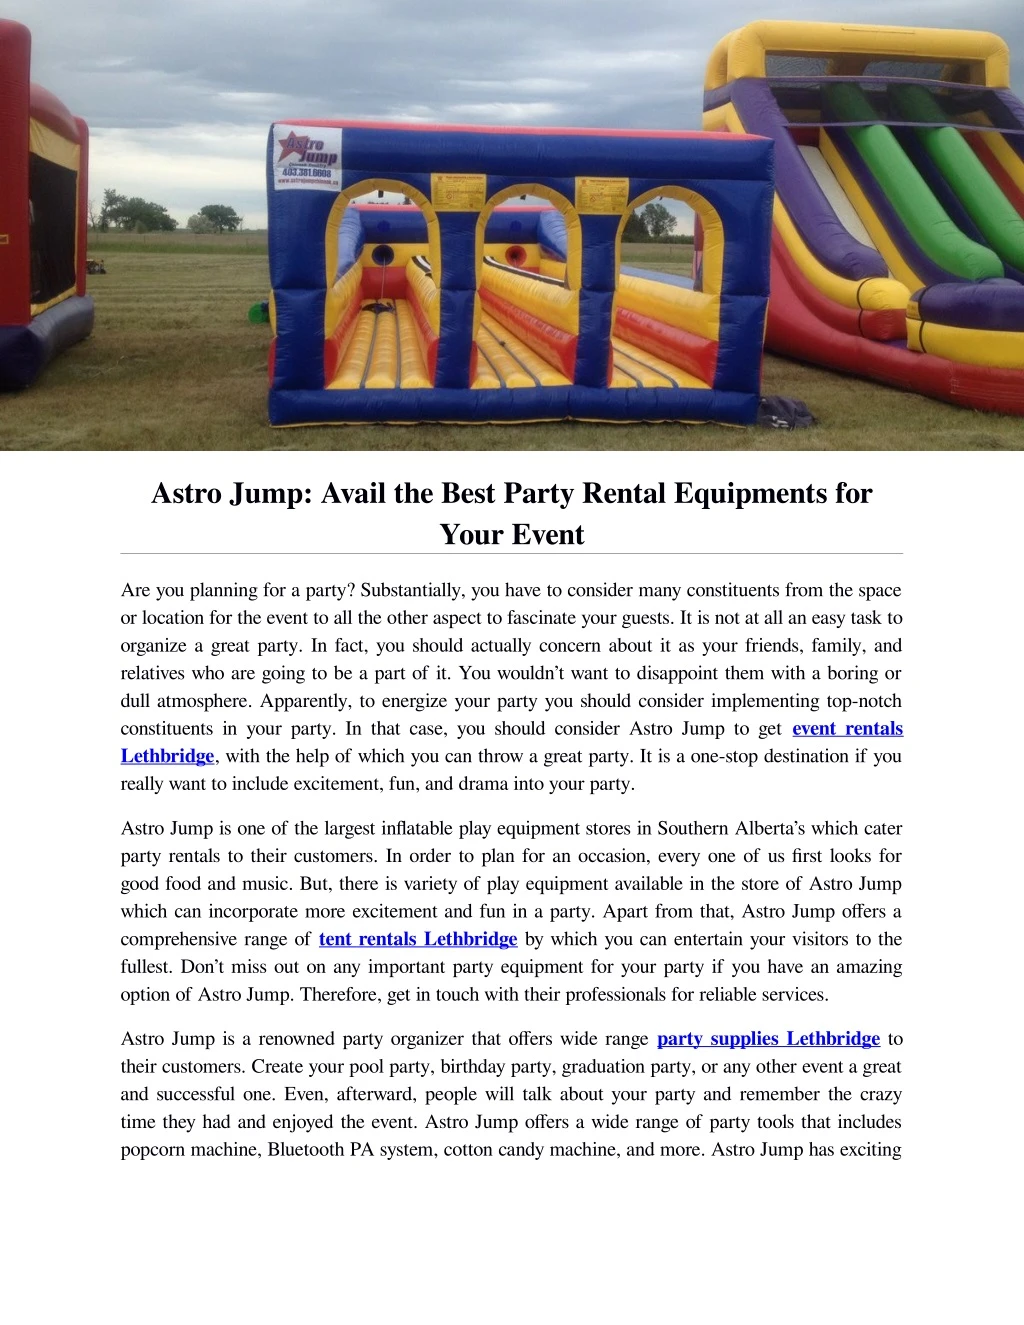 astro jump avail the best party rental equipments